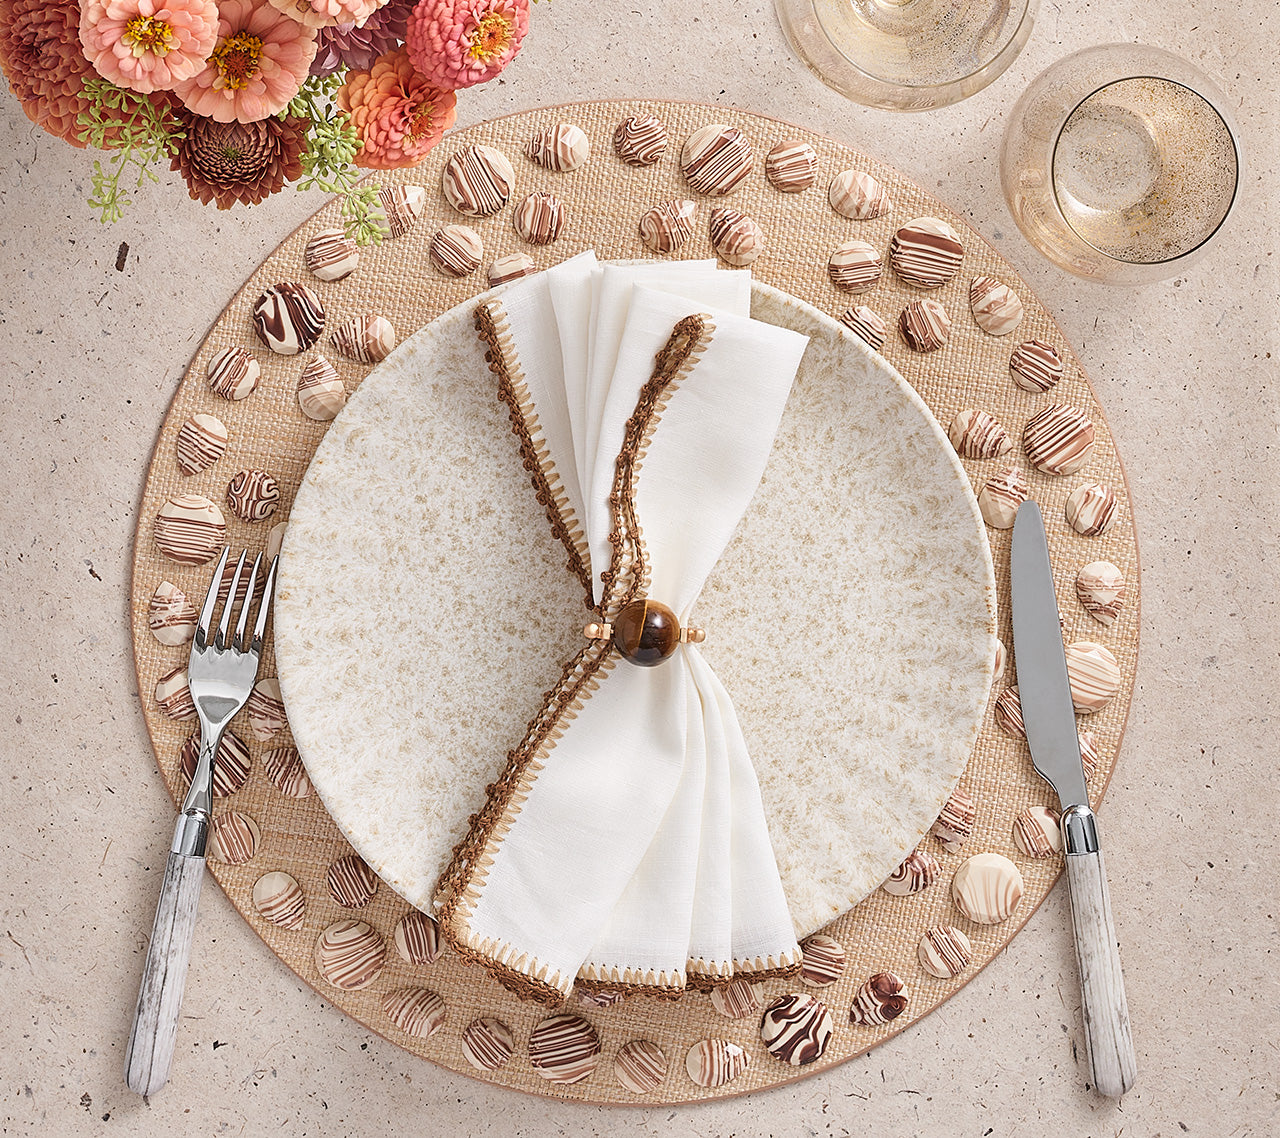 Kim Seybert Luxury Knotted Edge Napkin in White, Natural & Brown with Cabochon Natural brown Placemat and Mineral Napkin Ring